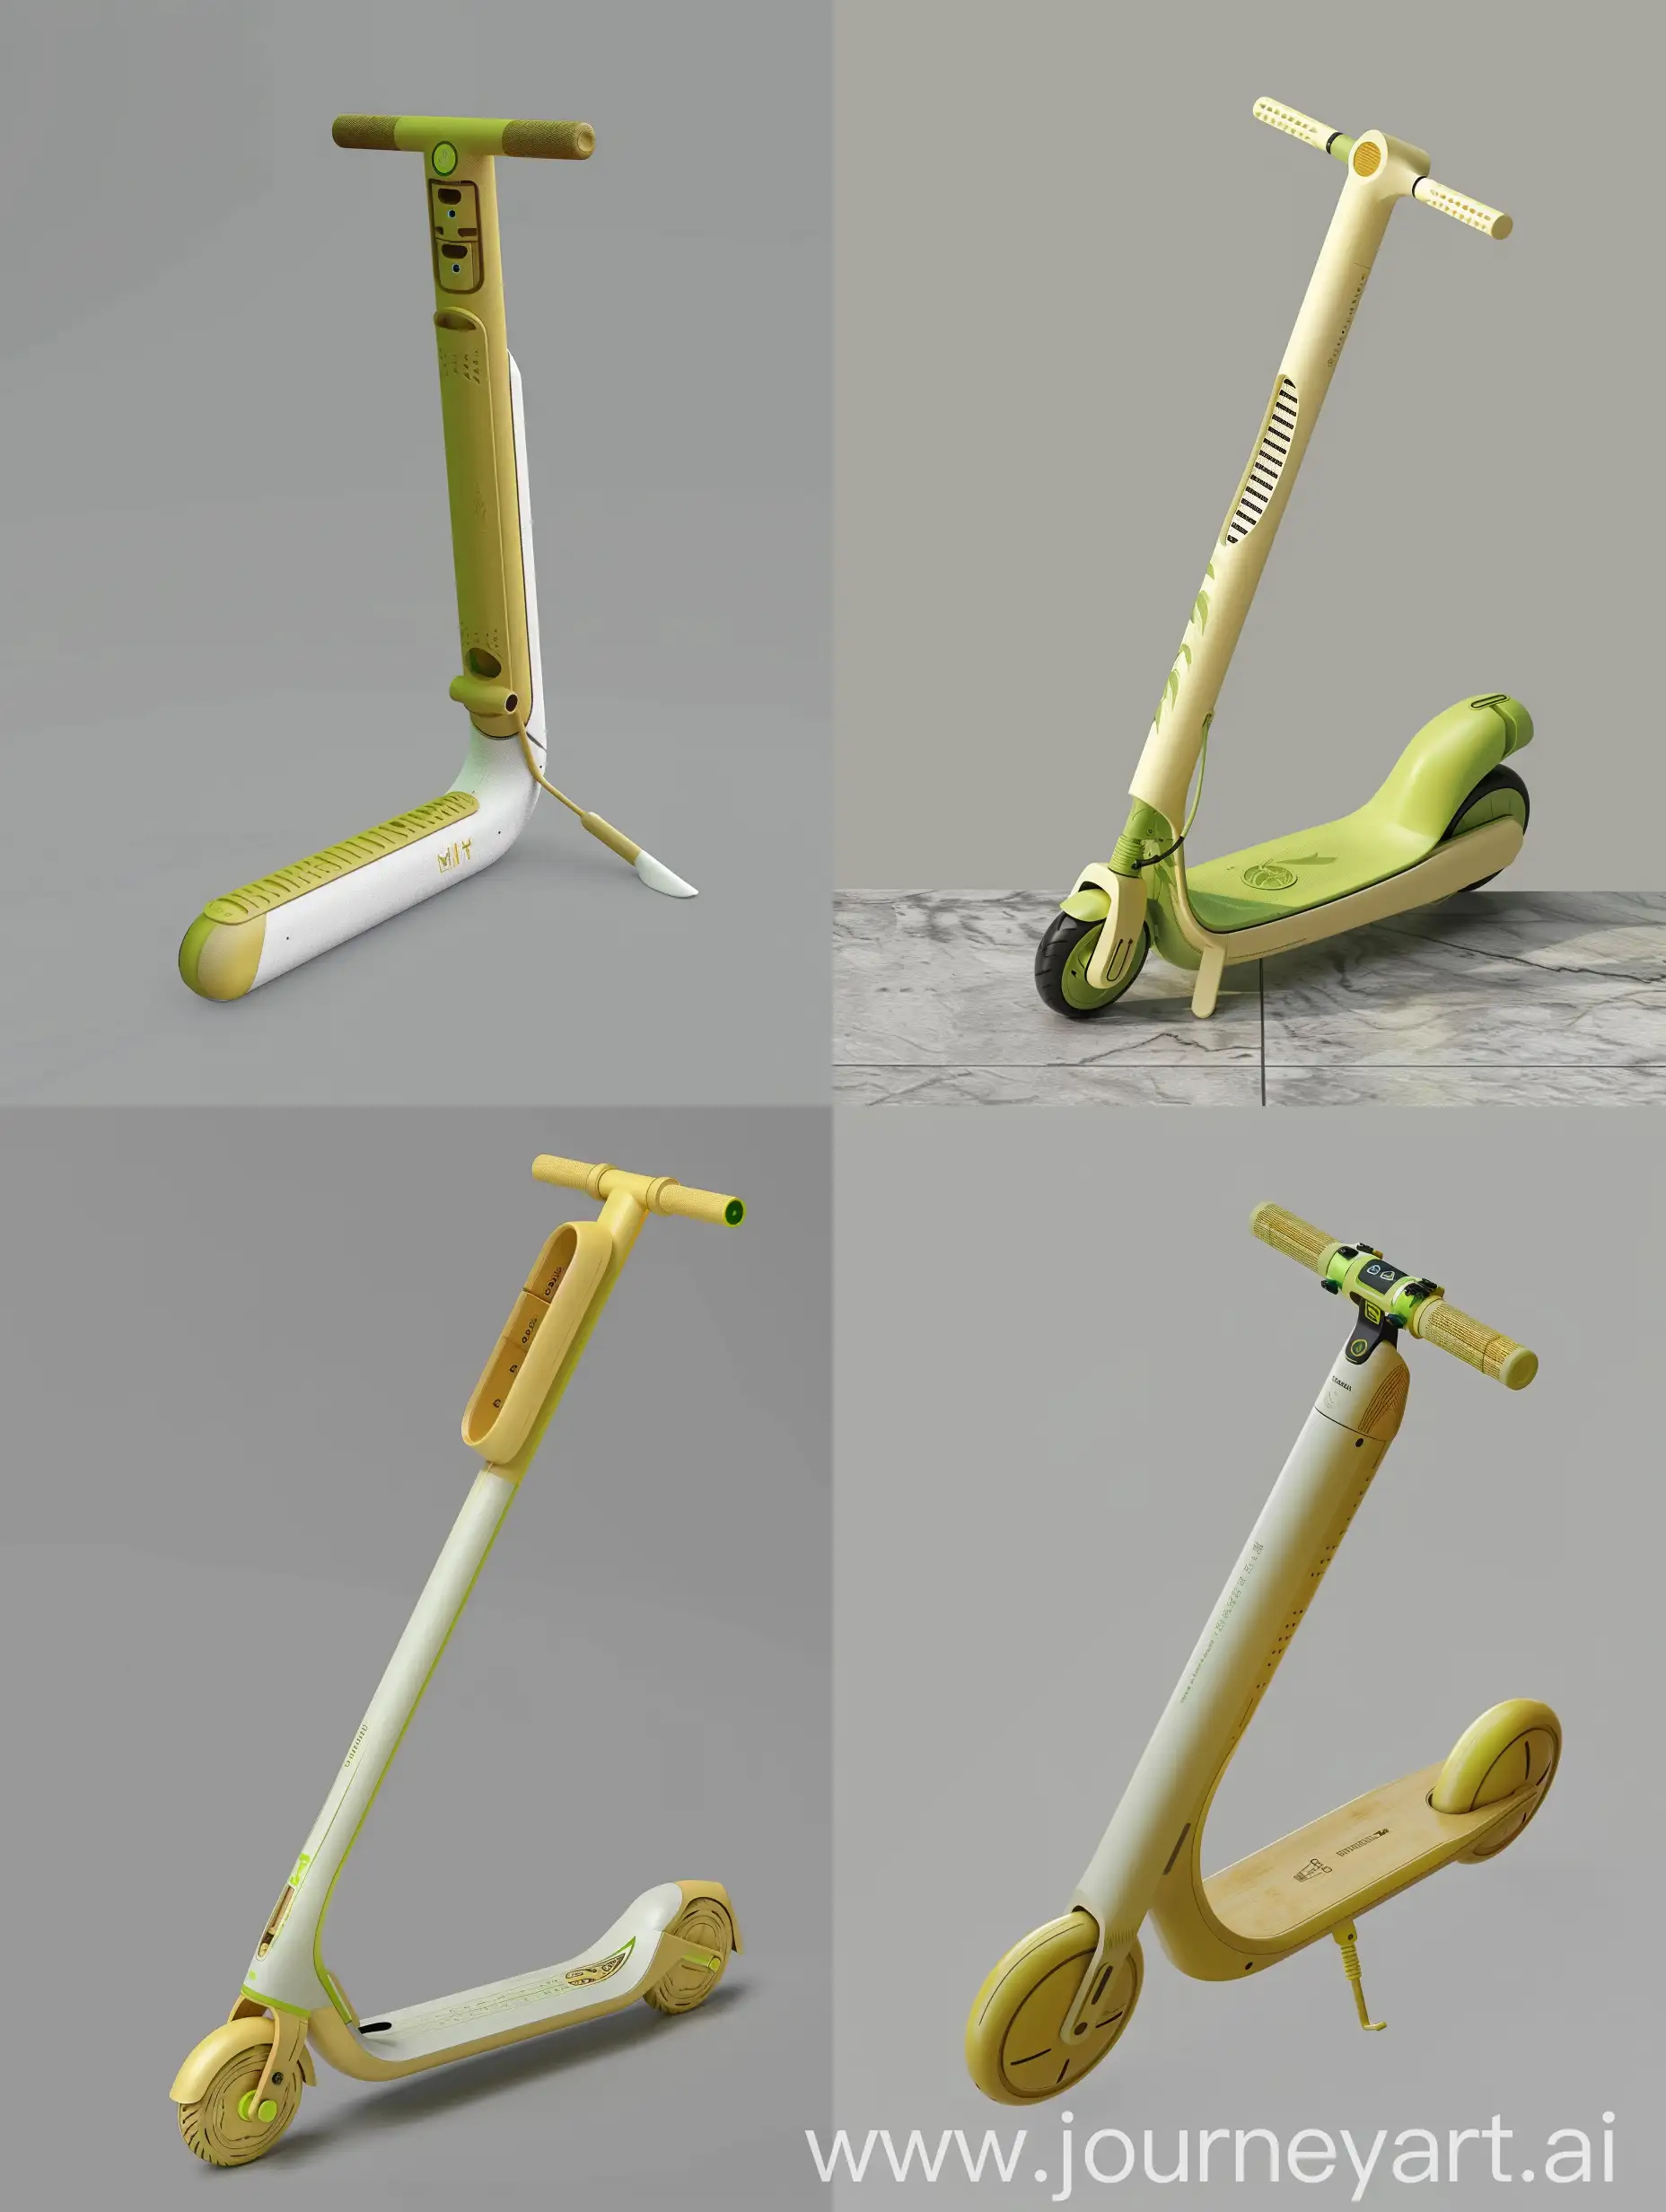 Design a elegance futuristic, foldable eco-friendly electric scooter for young people inspired by the characteristics and symbolism of bamboo. The scooter features sleek, smooth curves with a matte warm white finish and slight transparency, accented with green tones inspired by bamboo. The handle design is minimalistic and curved, inspired by bamboo leaves, with a subtle texture, made from durable composite materials. The footboard is a multi-segmented structure with a textured, non-slip surface, folding neatly into the main body.The scooter folds into a compact cylindrical shape with non-uniform cross-sections mimicking bamboo segments. The wheels are retractable, folding into the body via a spring-loaded and gear system inspired by the retraction mechanisms of turtle limbs, ensuring a smooth, unified form. The handles fold inward along precise hinge lines, inspired by the folding of insect wings and Mimosa pudica leaves, using spring-loaded or magnetic hinges.The scooter includes solar panels for sustainable charging and a kinetic energy recovery system. A small, integrated display on the handlebar shows the map, path, charge level, and weather conditions. The design emphasizes both form and function, suitable for urban commuting, highlighting eco-friendliness and innovation. Materials used are lightweight composites with a matte warm white and slightly transparent finish, accented with green tones. The handlebar features an integrated power button and a folding/unfolding button for ease of use, with the LED display centered for clear visibility. The overall design is clean, minimalistic, and inspired by the natural elegance and segmented structure of bamboo. The scooter also features customizable LED lights and mobile app integration for personalization and tracking of usage and environmental impact.